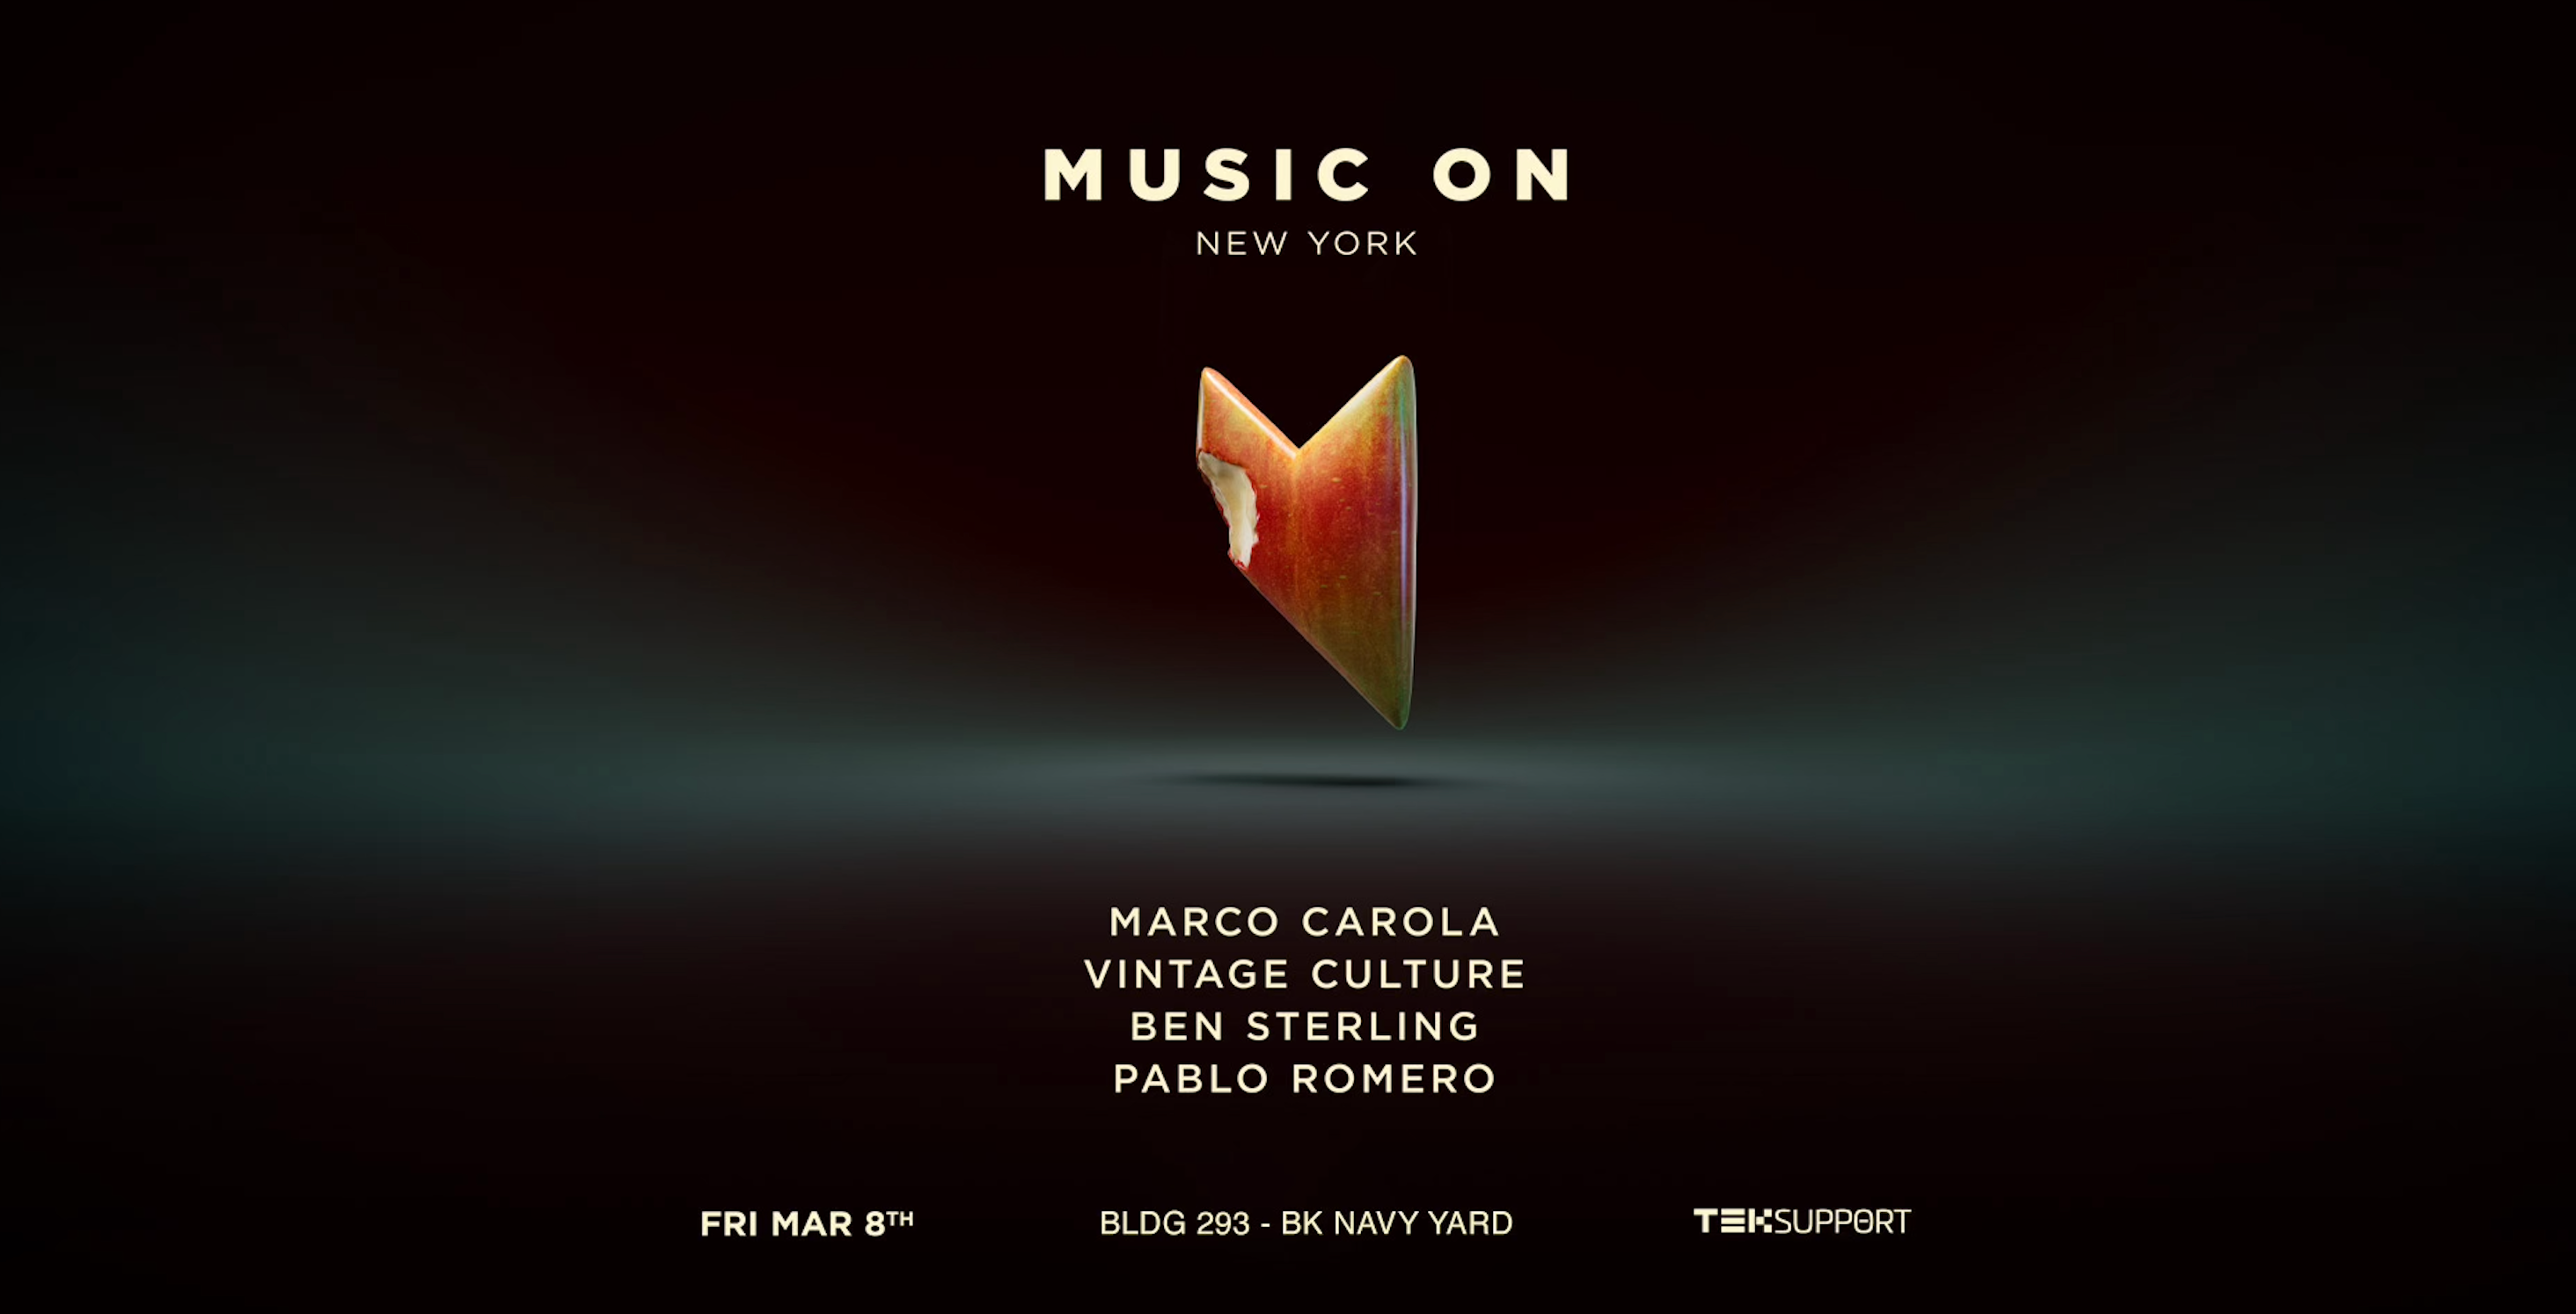 Teksupport: Music On x Marco Carola (SOLD OUT) at TBA - BLDG 293 